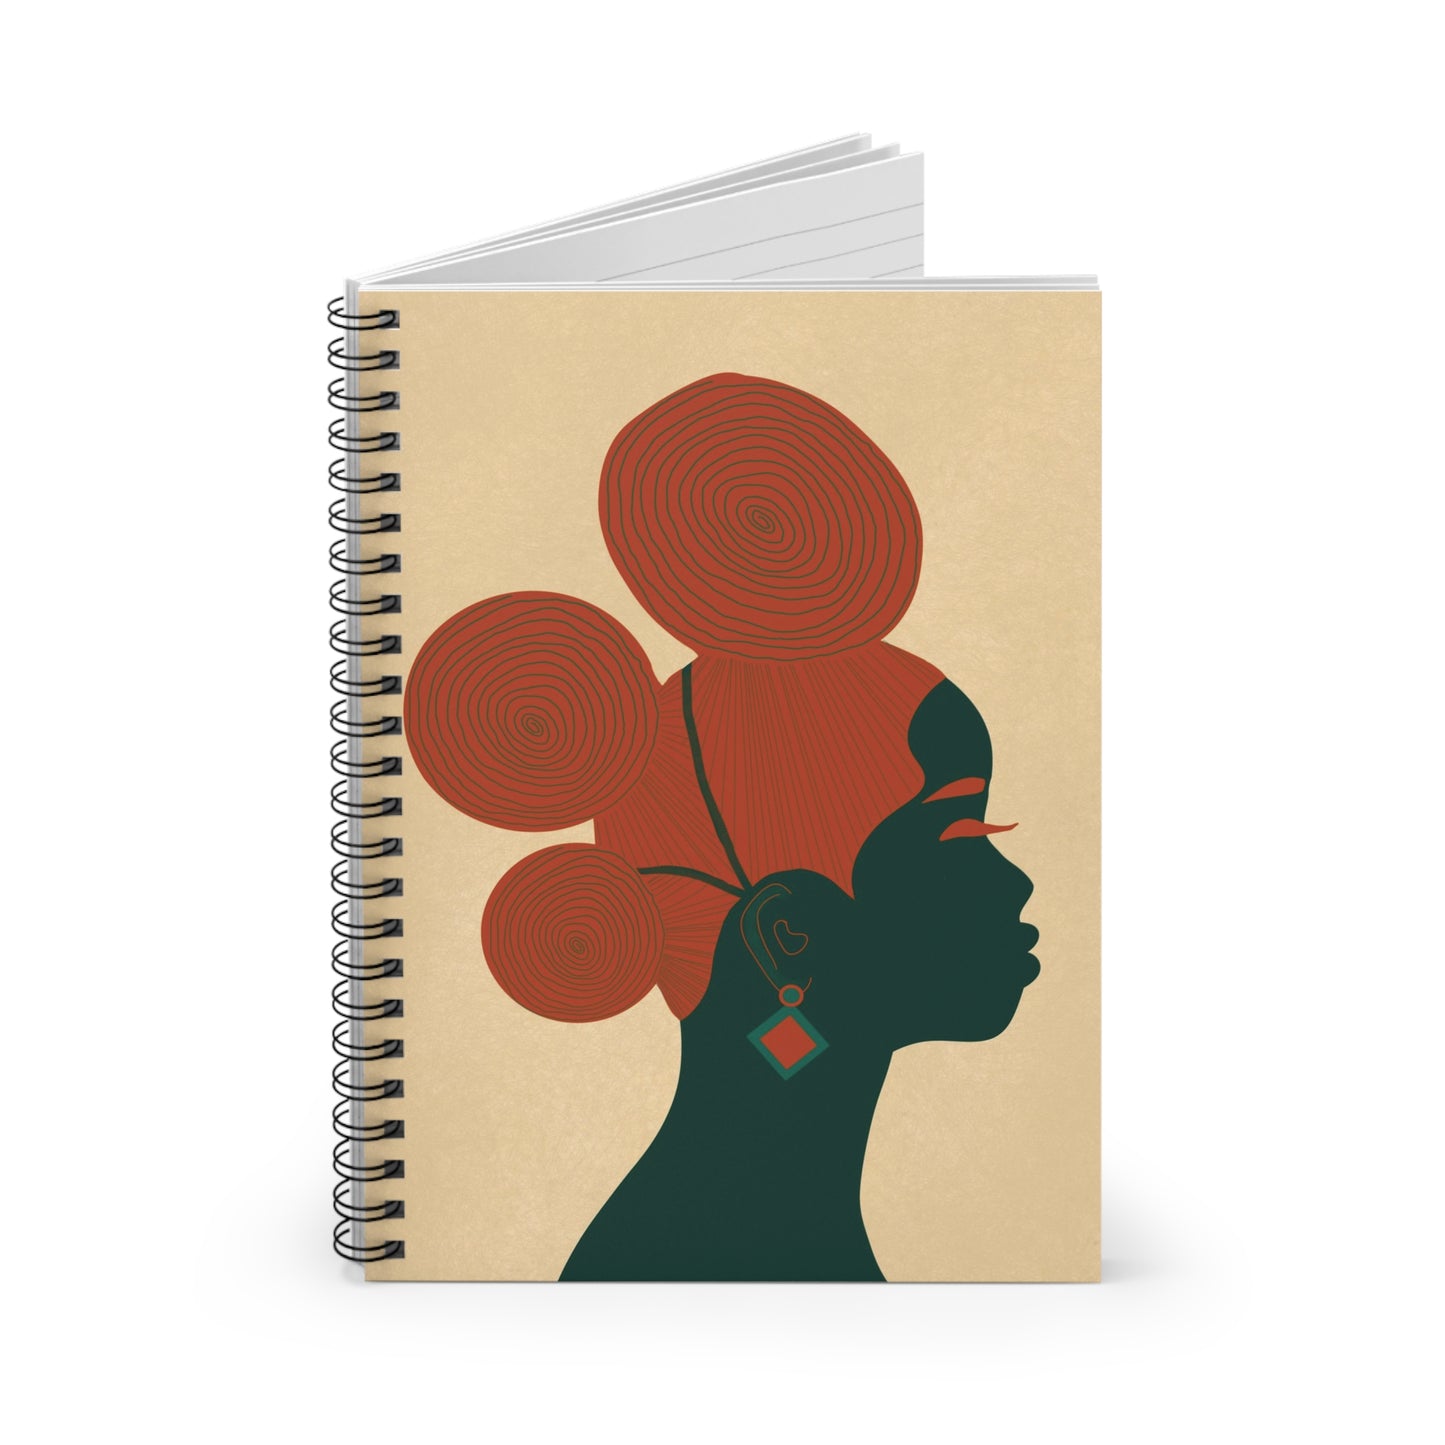 Three Buns Spiral Notebook - Ruled Line "Don't Touch My Hair Collection"